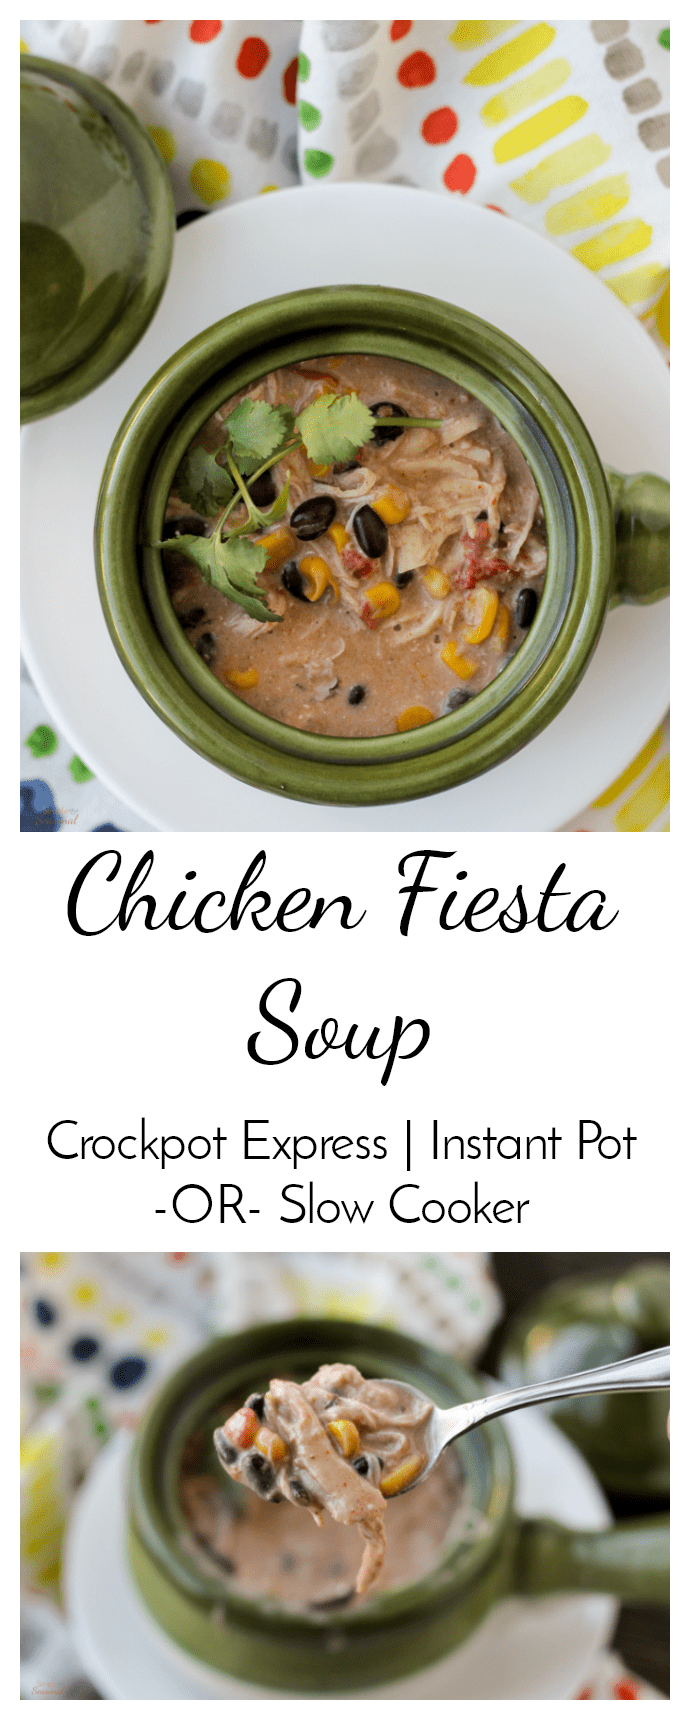 Chicken Fiesta Soup is easy to make and full of delicious flavors! It's a family favorite that can be made in the slow cooker or the pressure cooker. via @nmburk